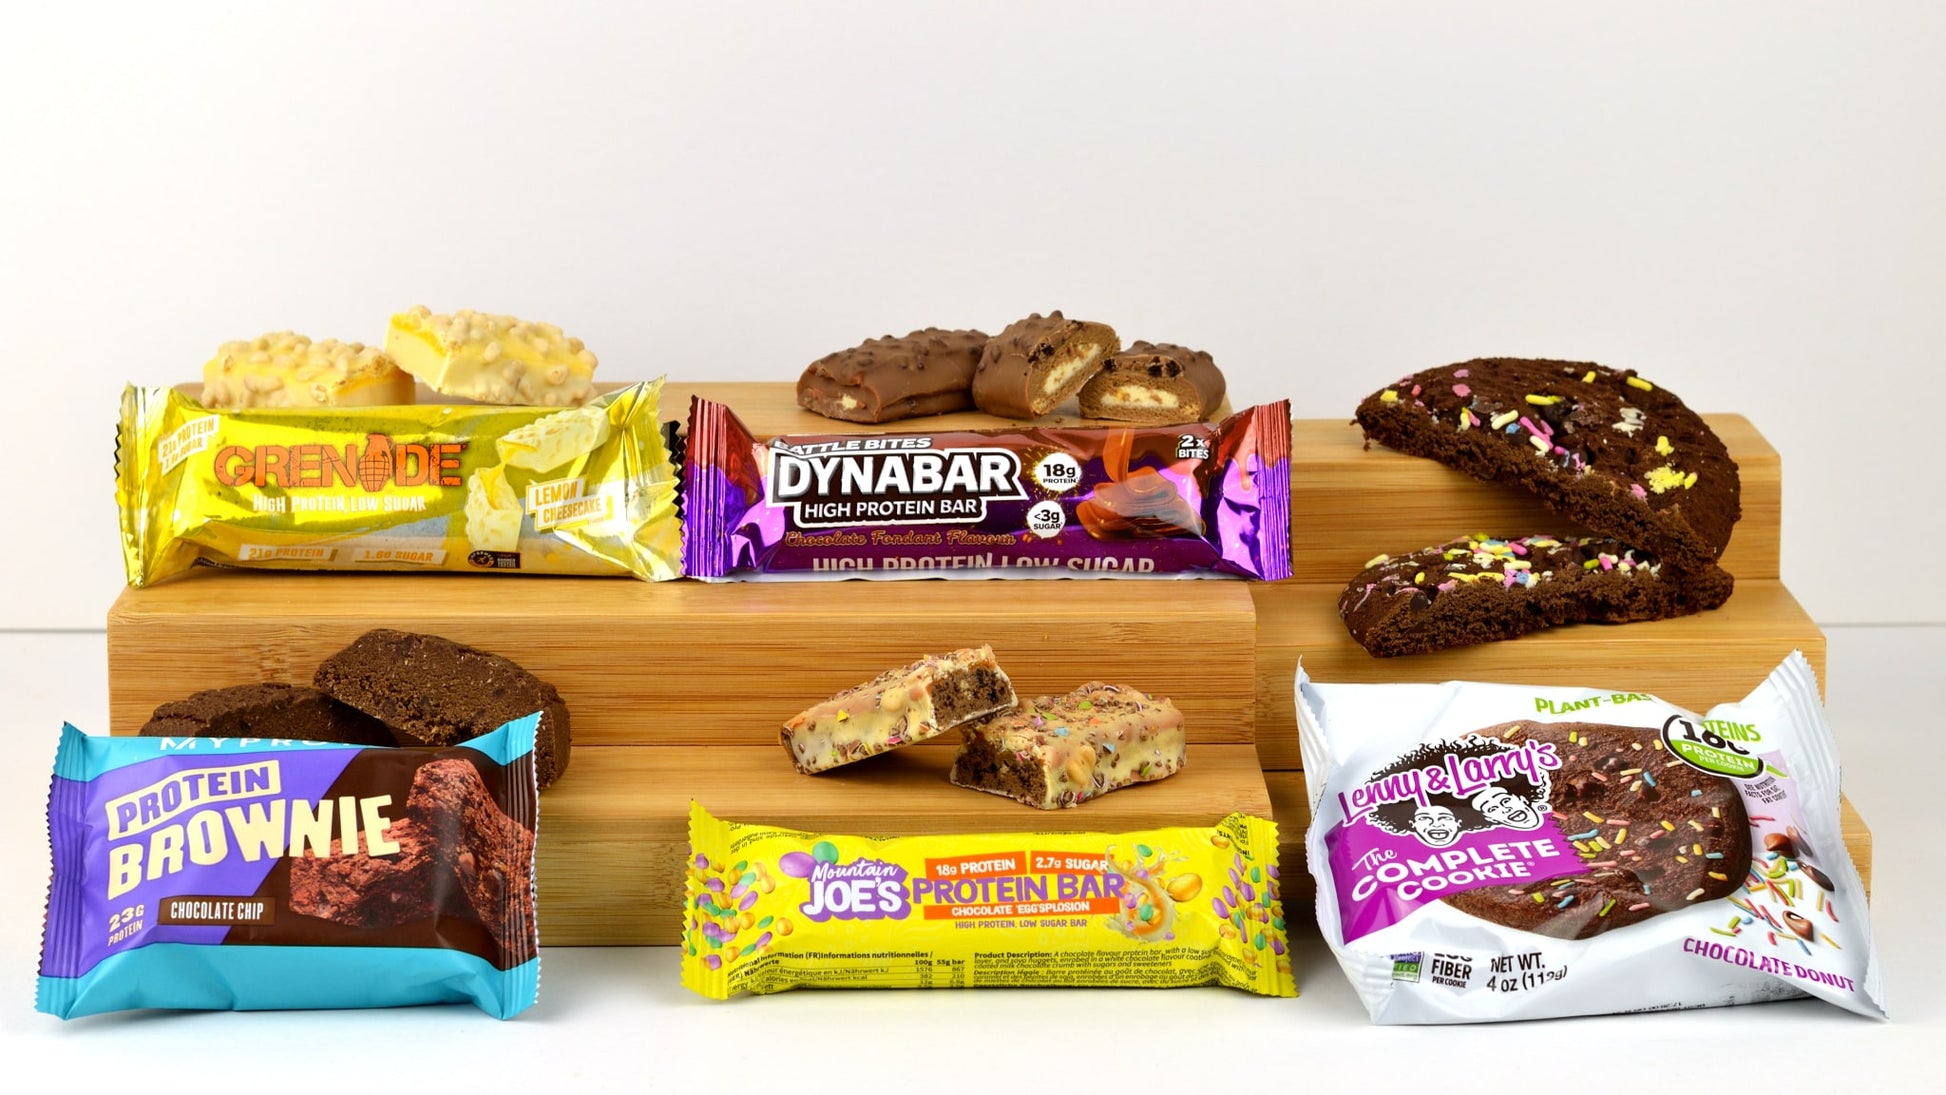 Box Of Protein | Gym Freak Gift | Protein Bars and Snacks | Grenade, Dynabar, Lenny & Larrys, Mountain Joes, MyProtein Brownie